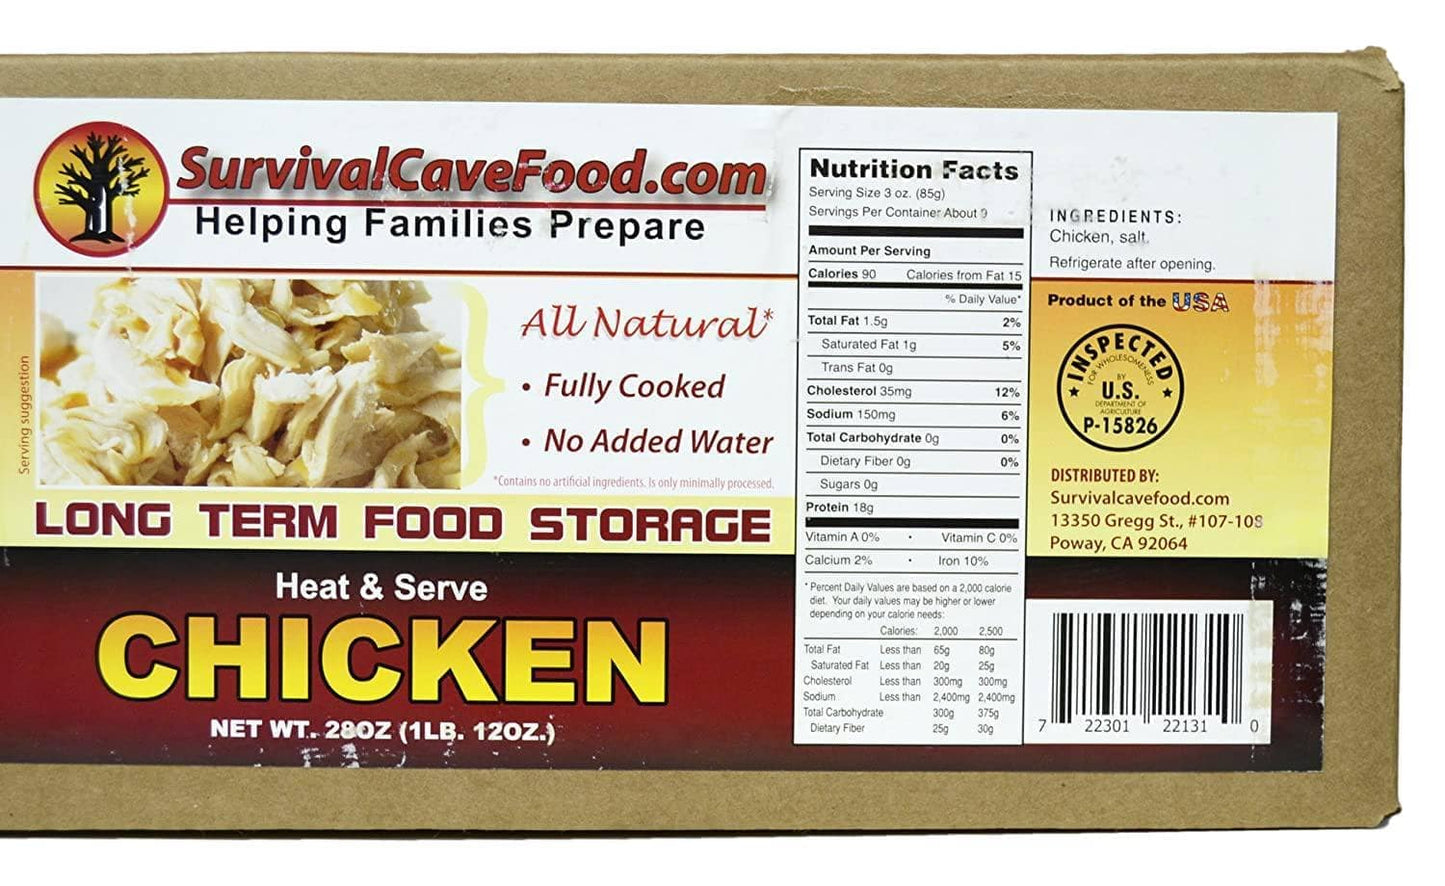 SurvivalCaveFood Chicken 12 - 28oz. Cans (1 Case) Long Term Food Storage Canned Meat